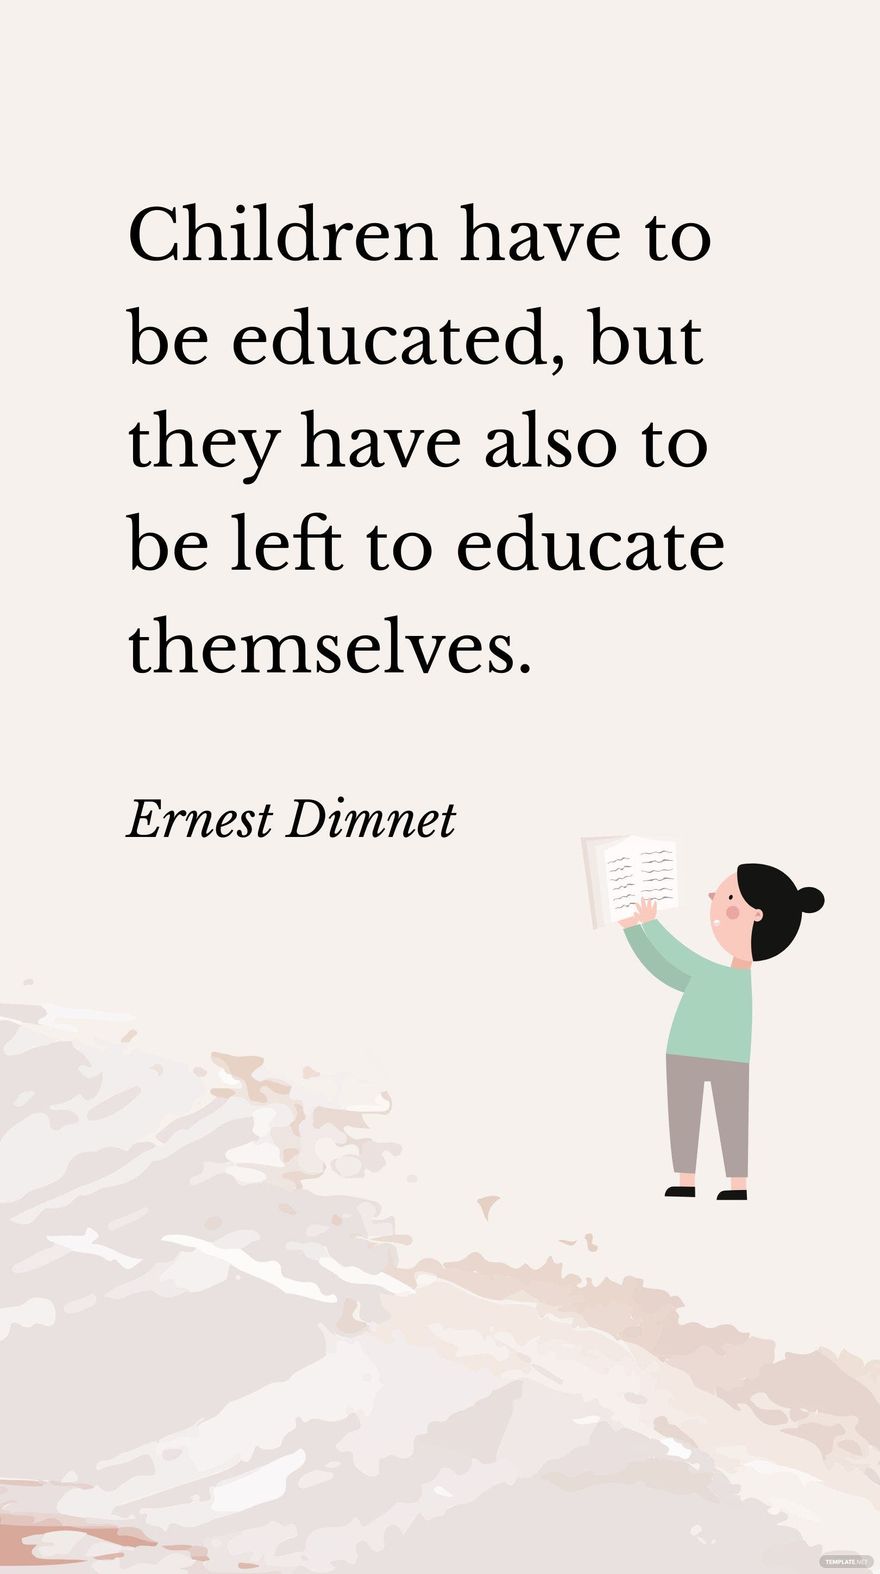 Ernest Dimnet - Children have to be educated, but they have also to be left to educate themselves.